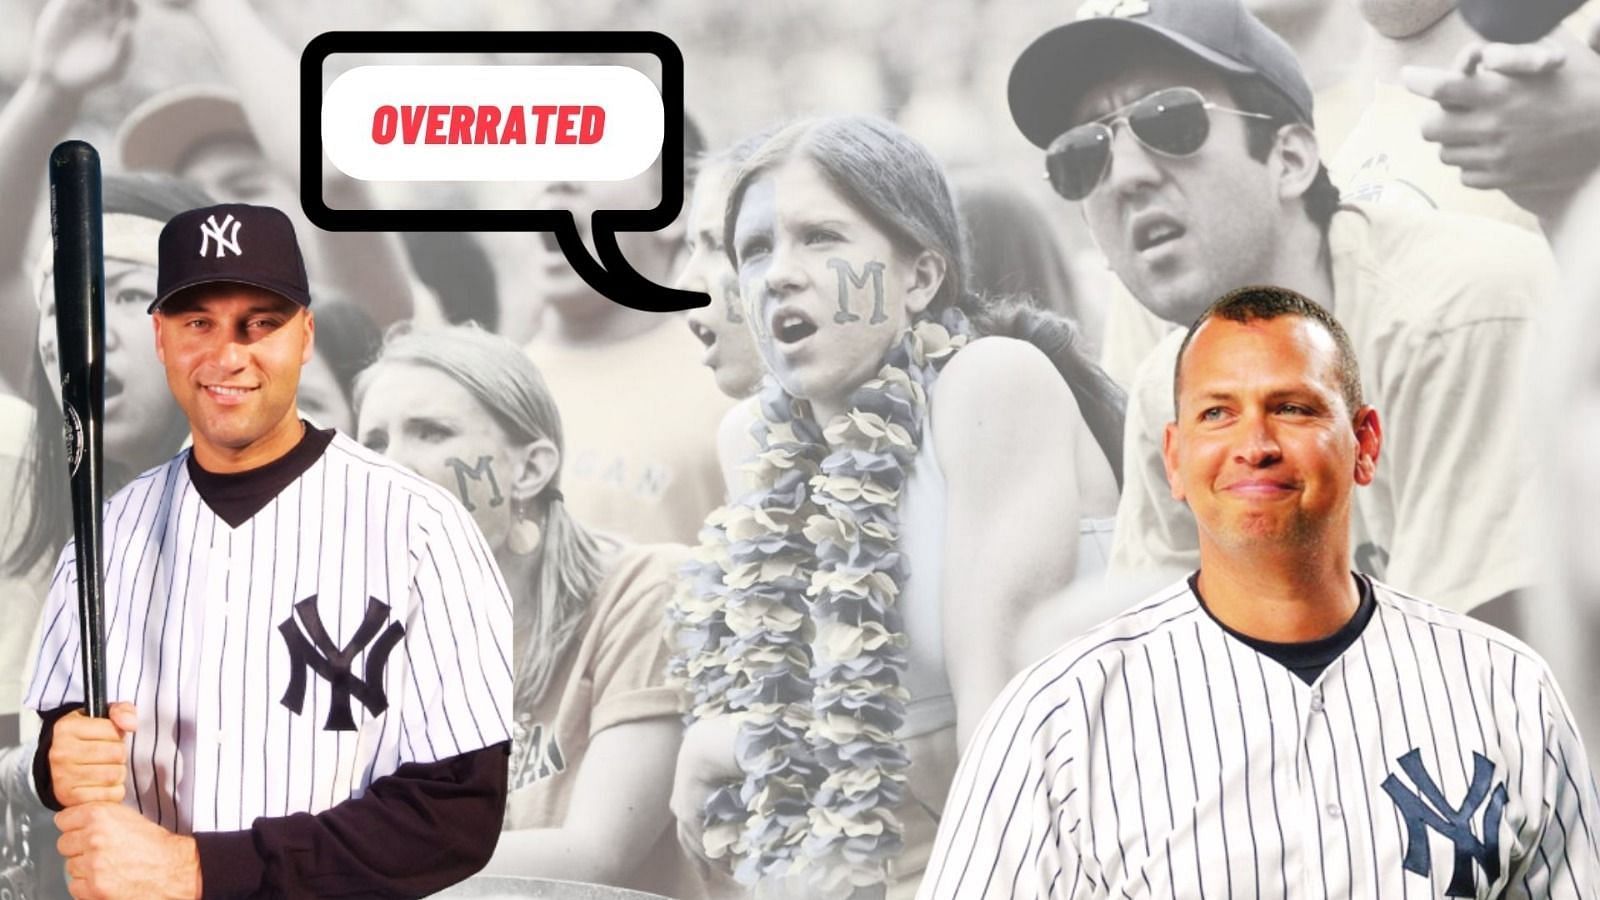 Alex Rodriguez and Derek Jeter have made the top ten list of overrated athletes according to ChatGPT